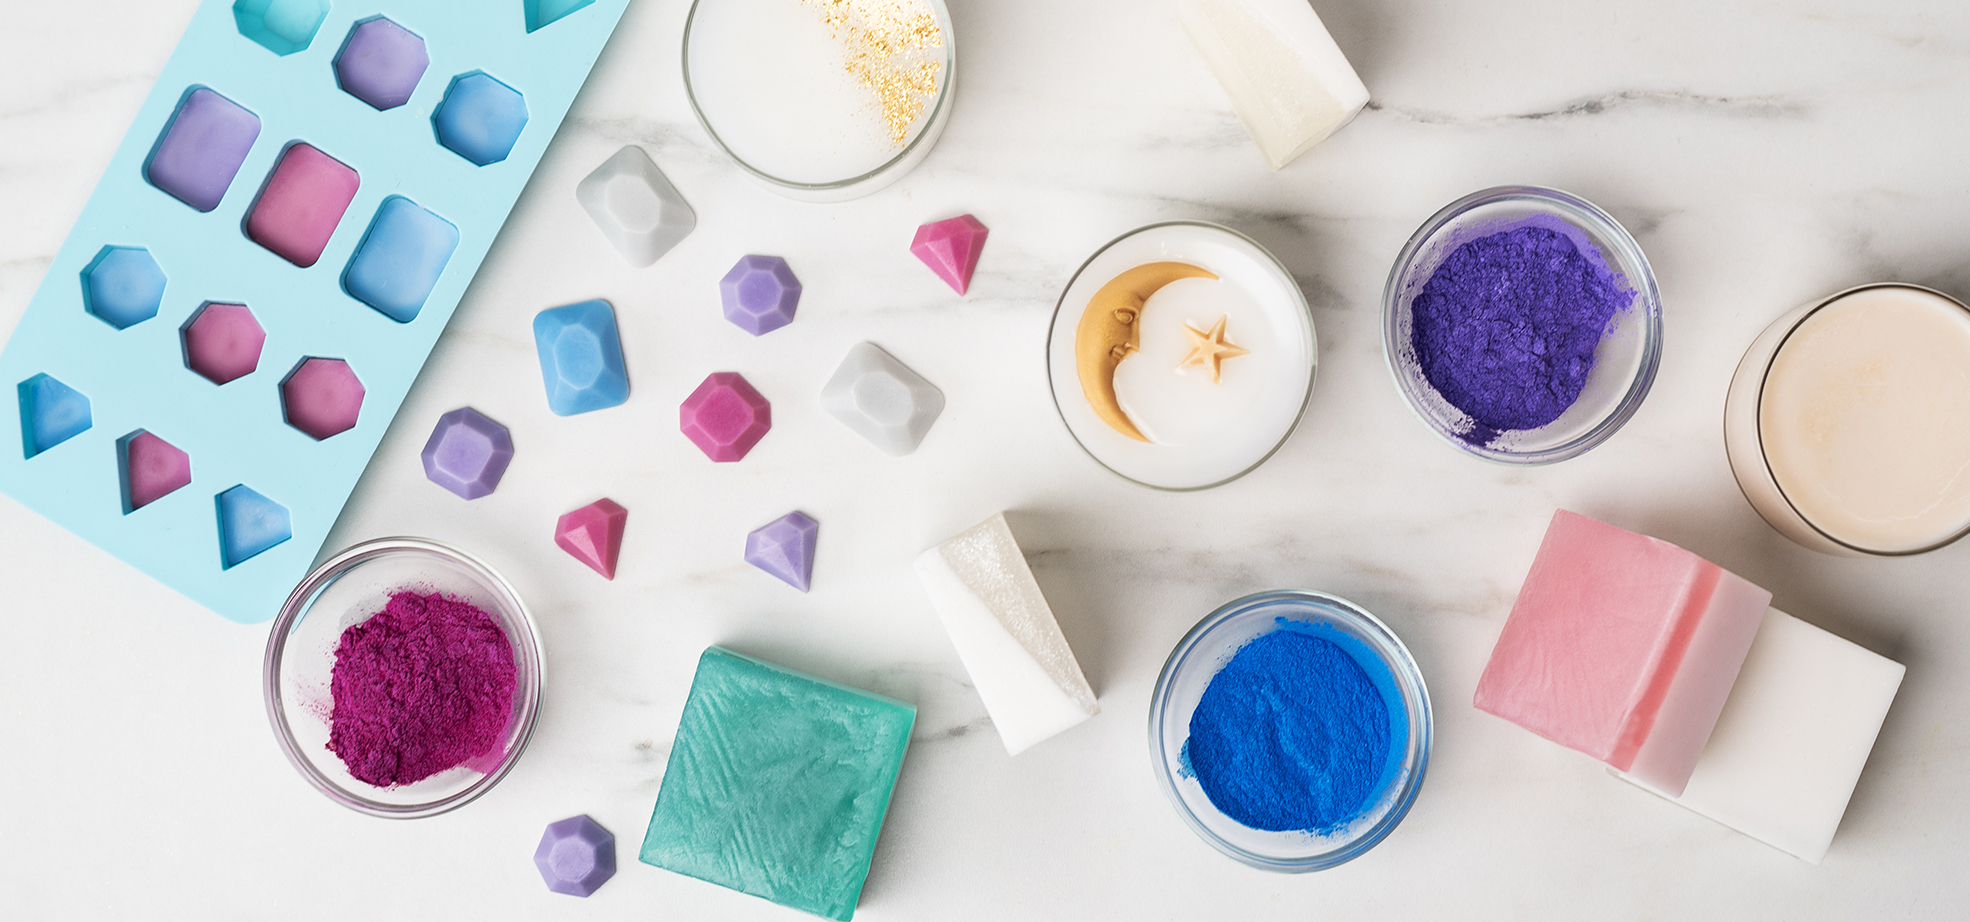 mica project inspiration: soap, wax melts, and wickless candles